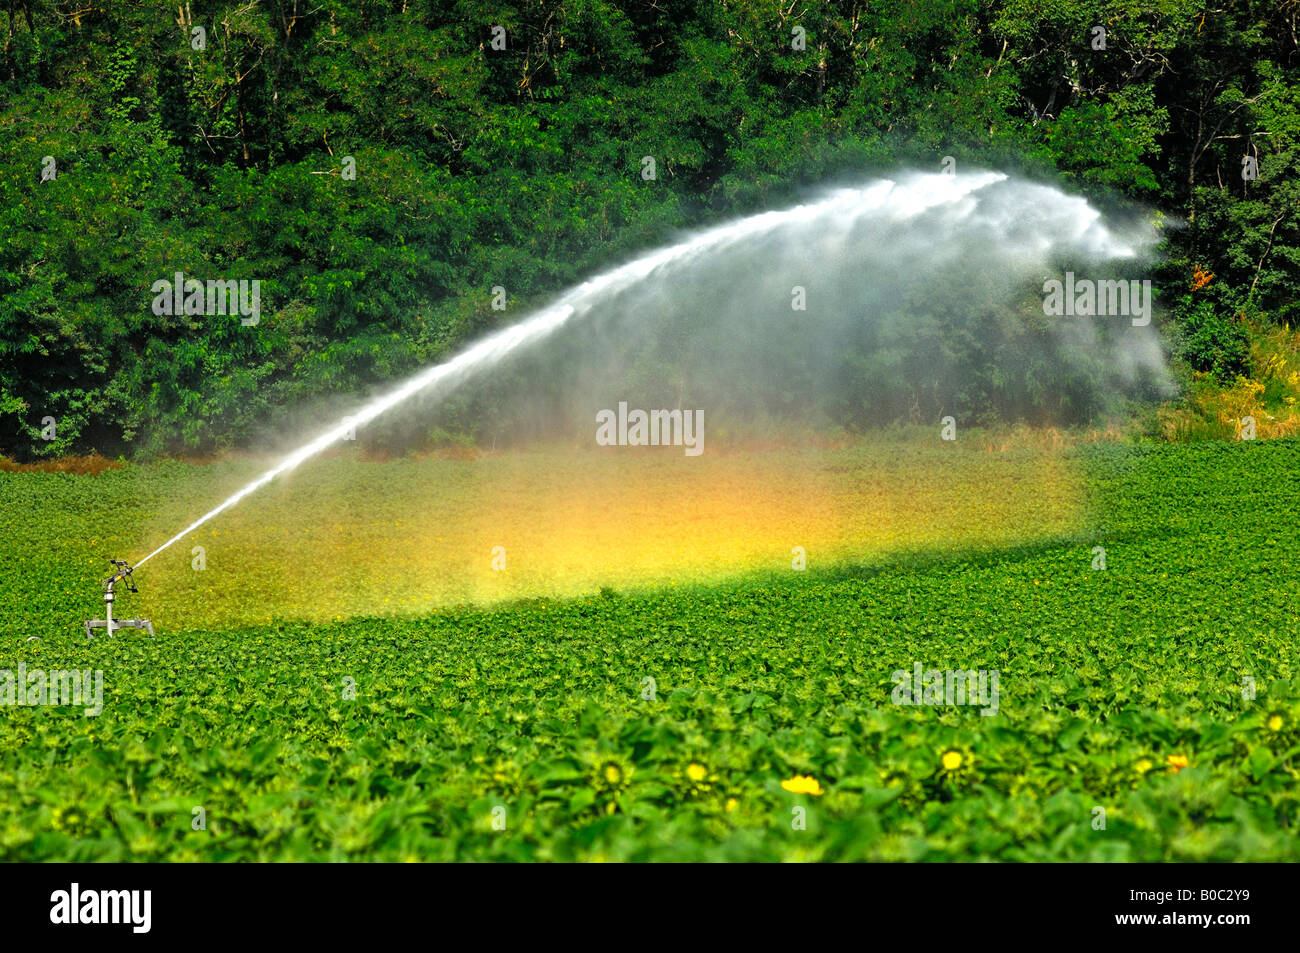 Rotary irrigation sprinkler in action Stock Photo